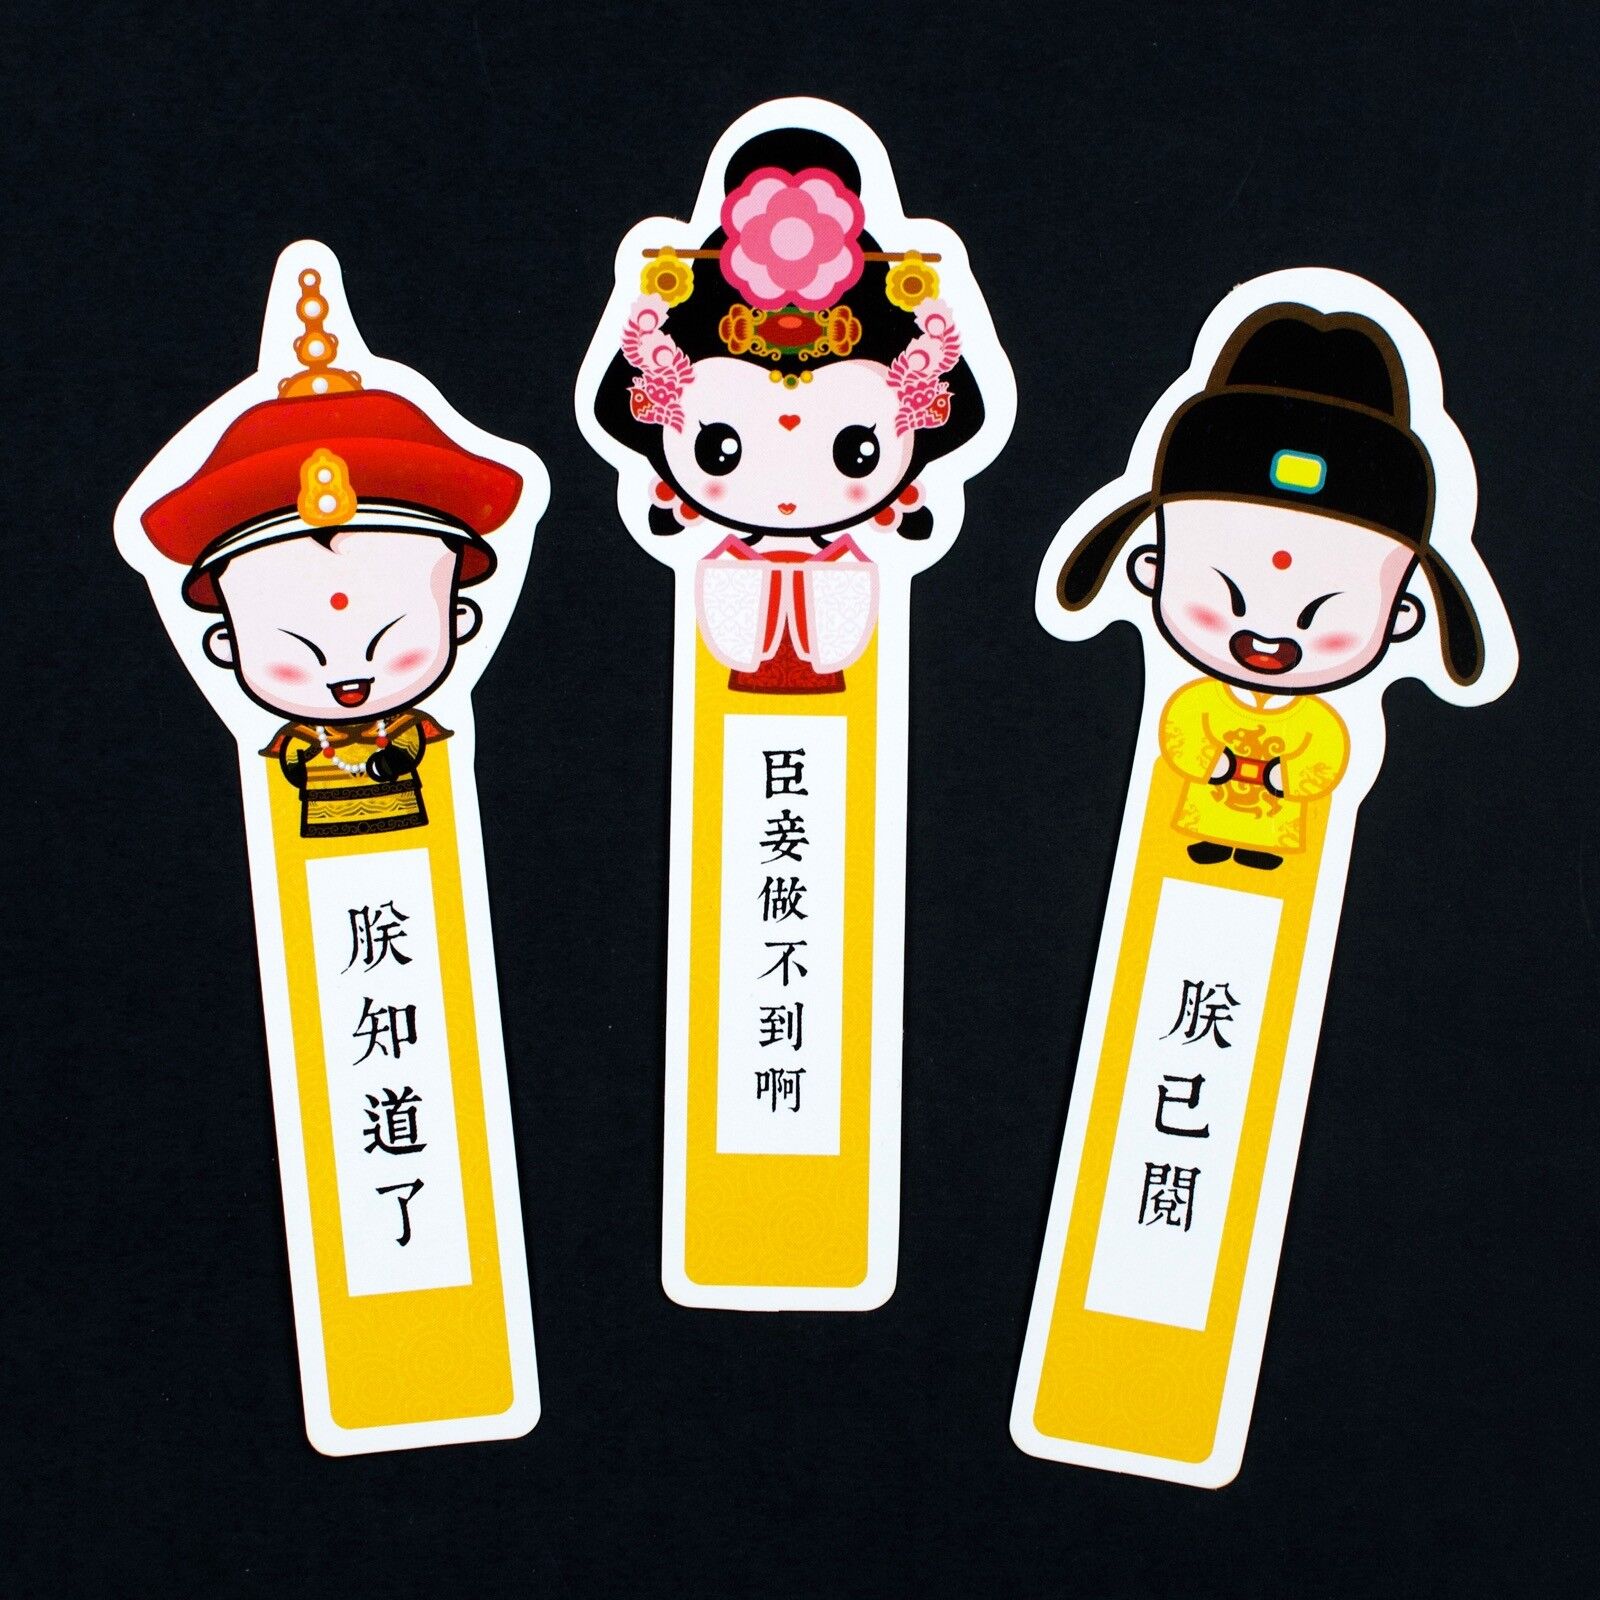 Set of 18 paper bookmarks of Chinese cartoon characters #B0025 | eBay